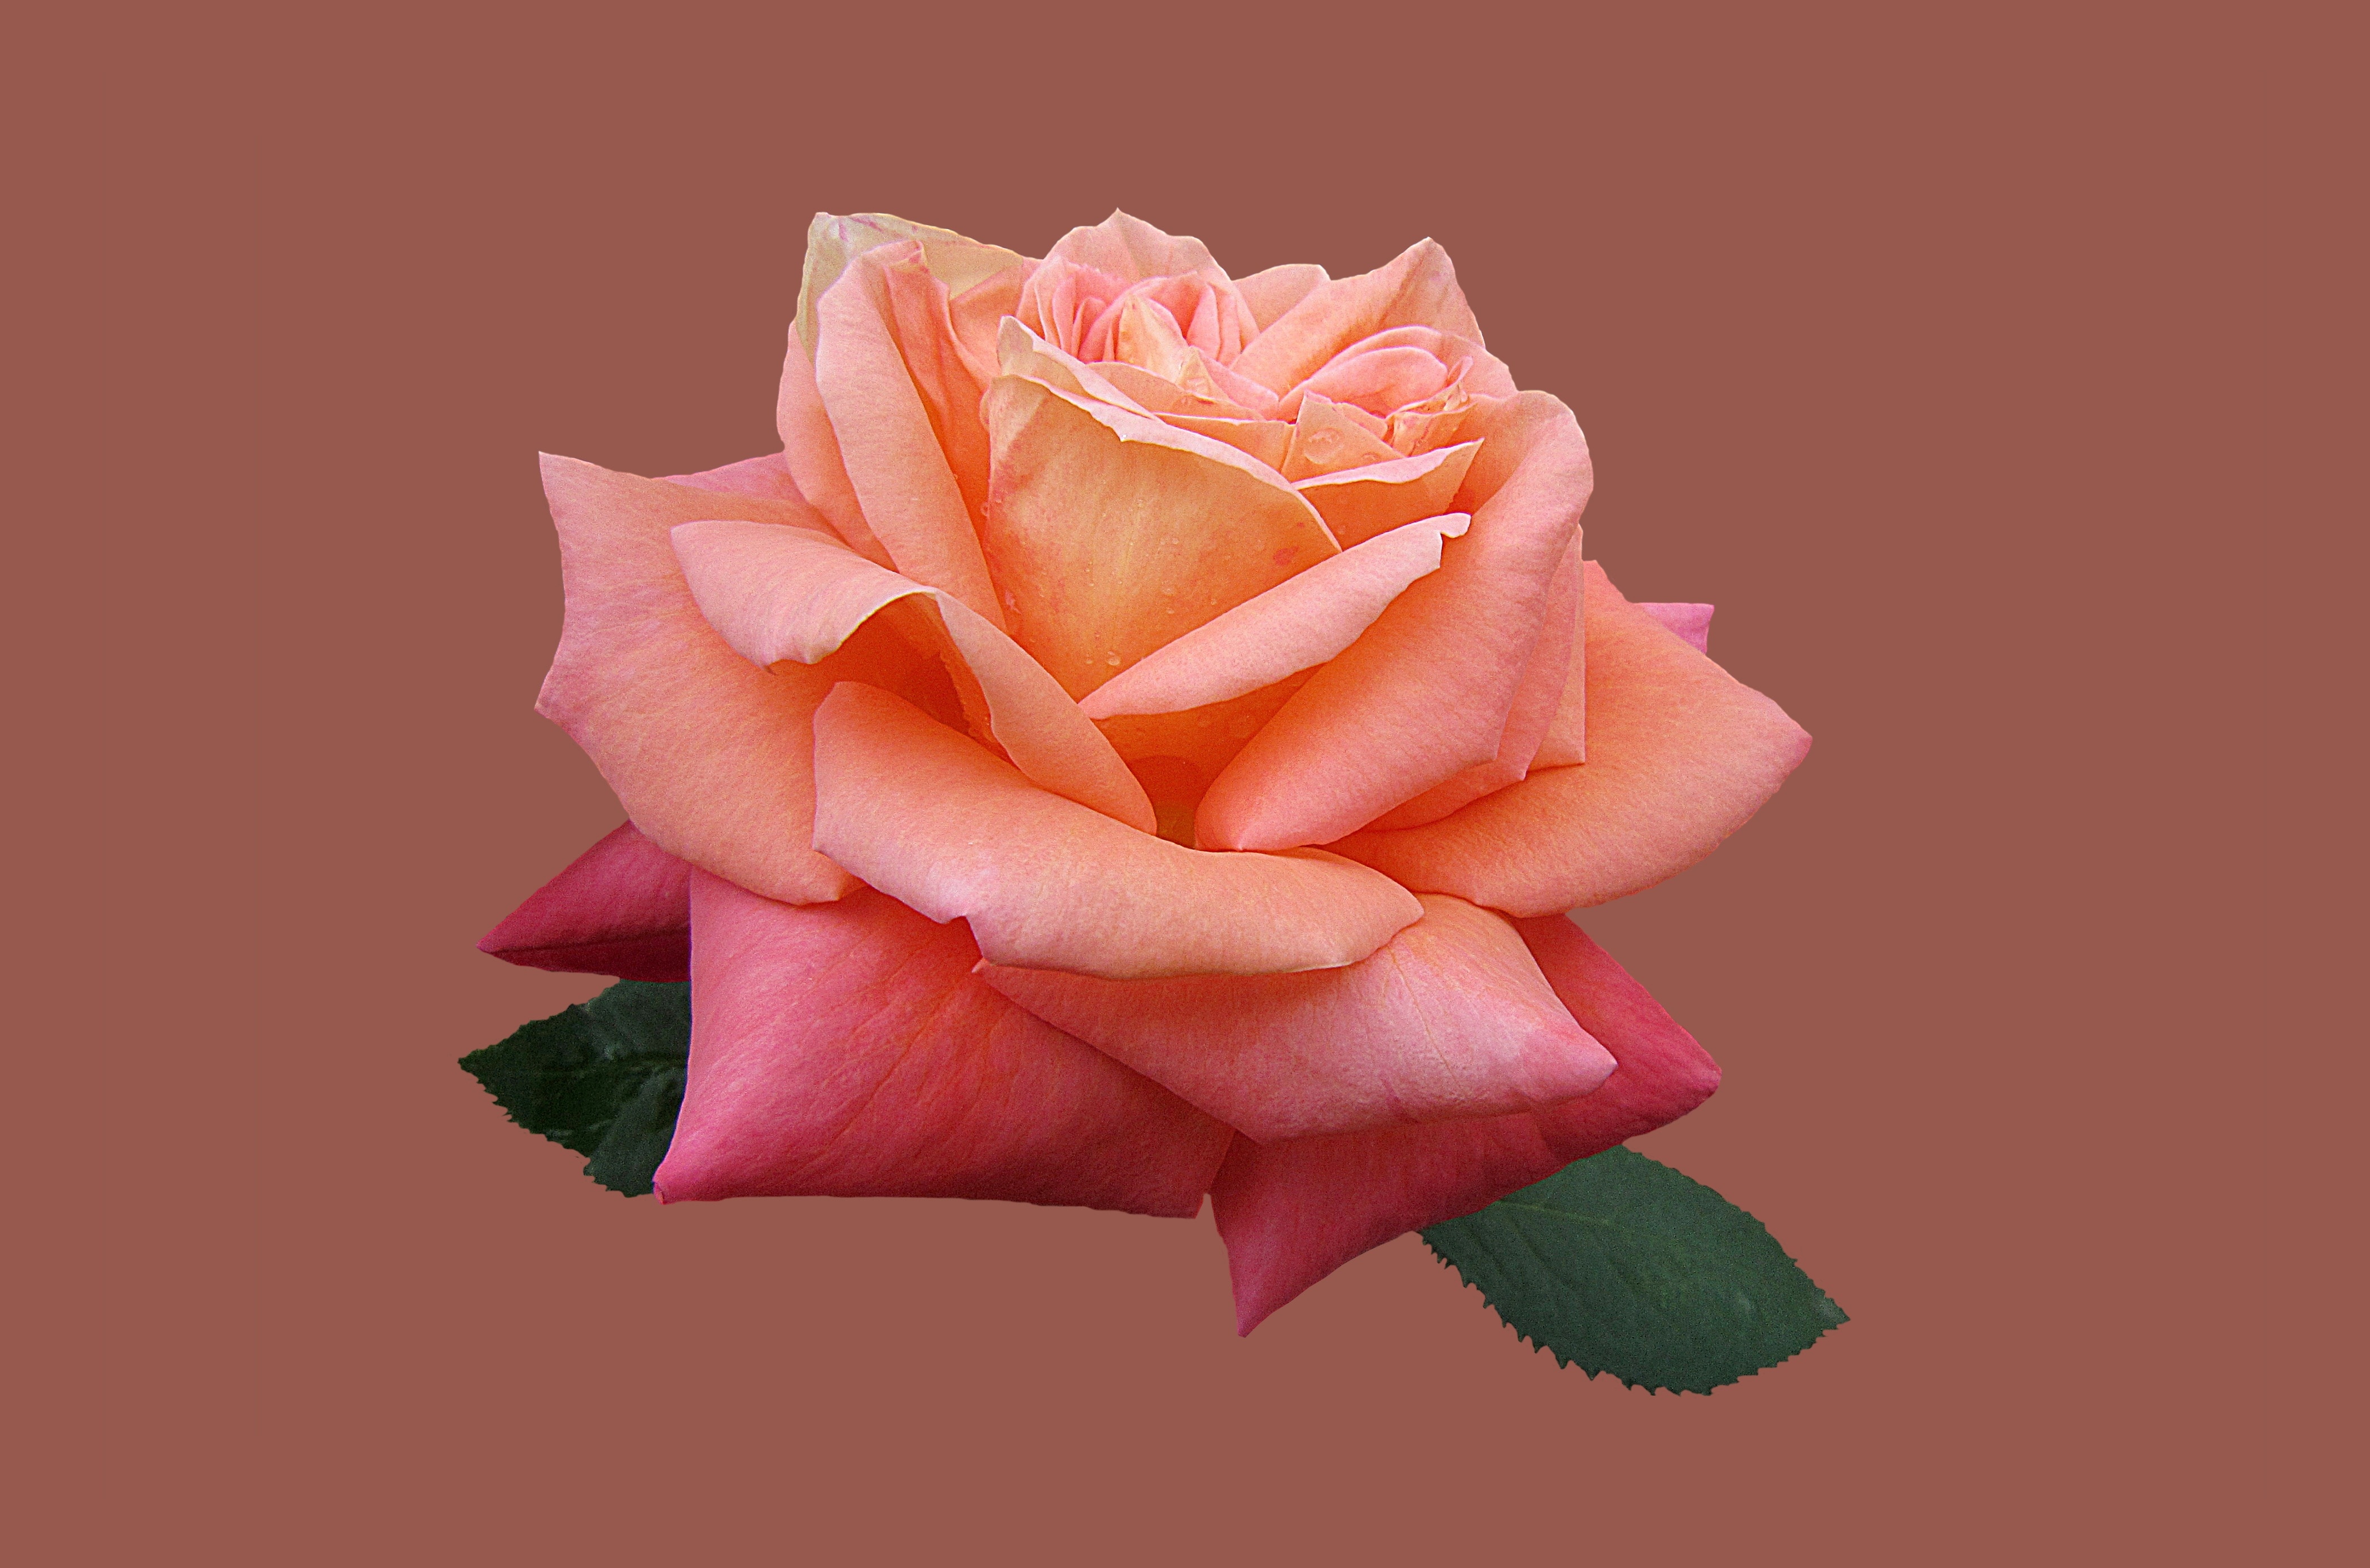 pink and peach 2 tone rose flower